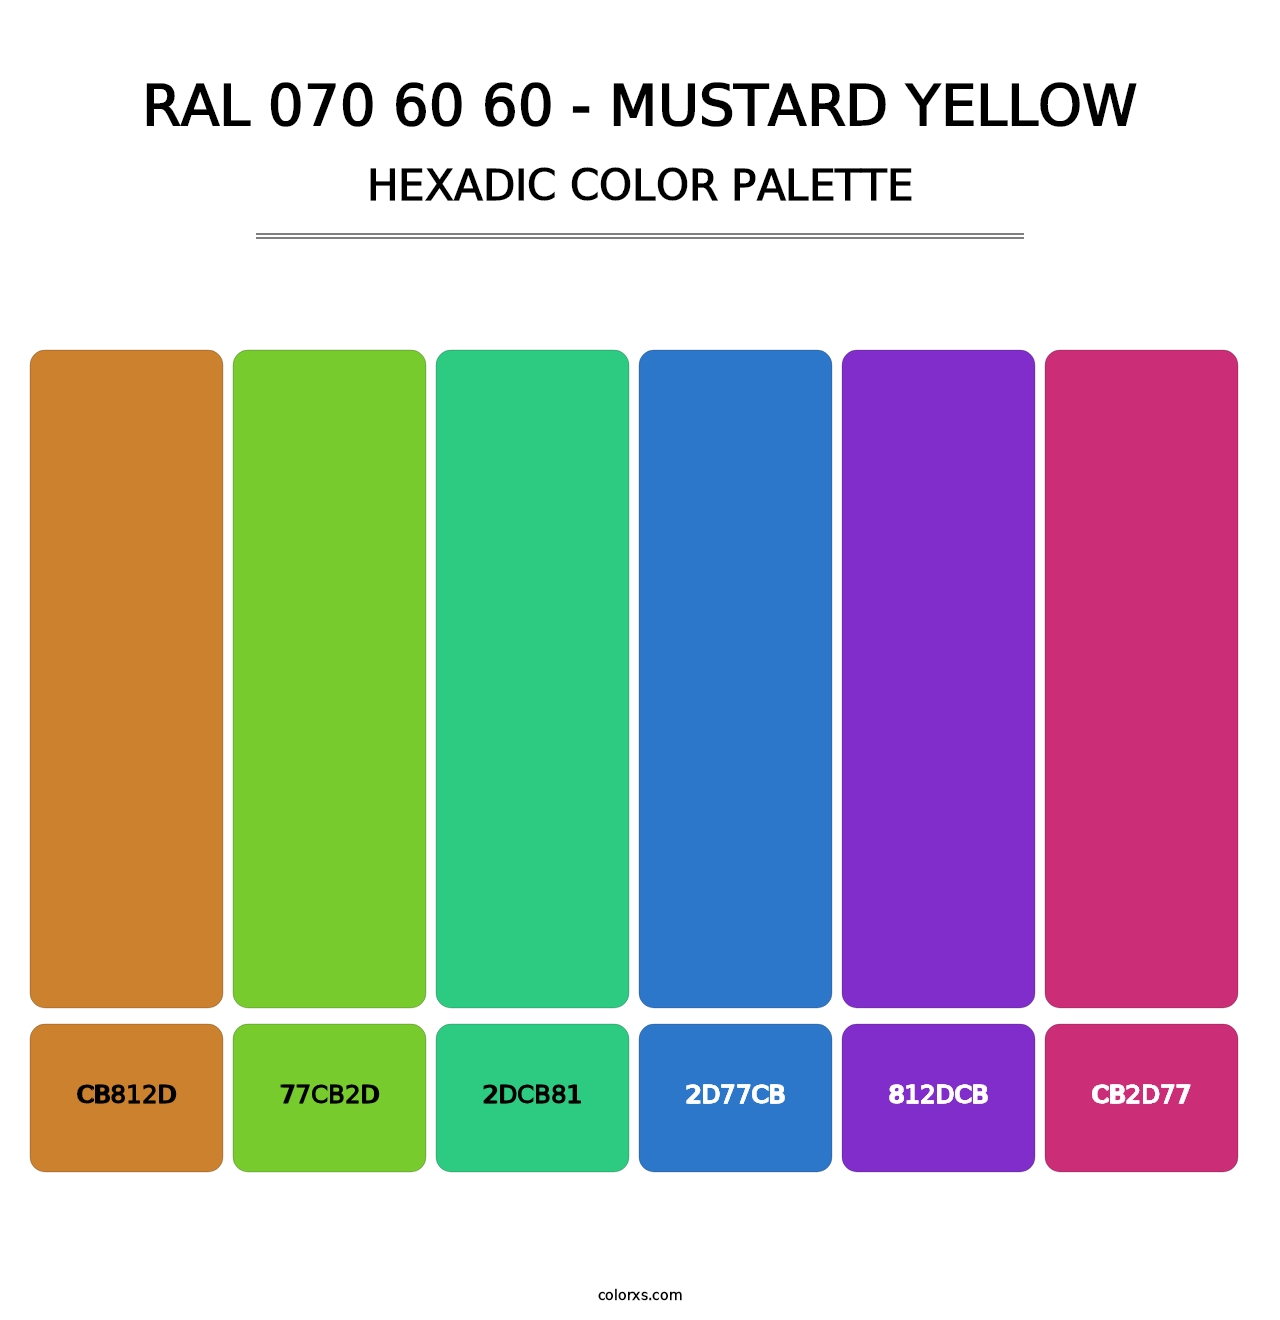 RAL 070 60 60 - Mustard Yellow - Hexadic Color Palette